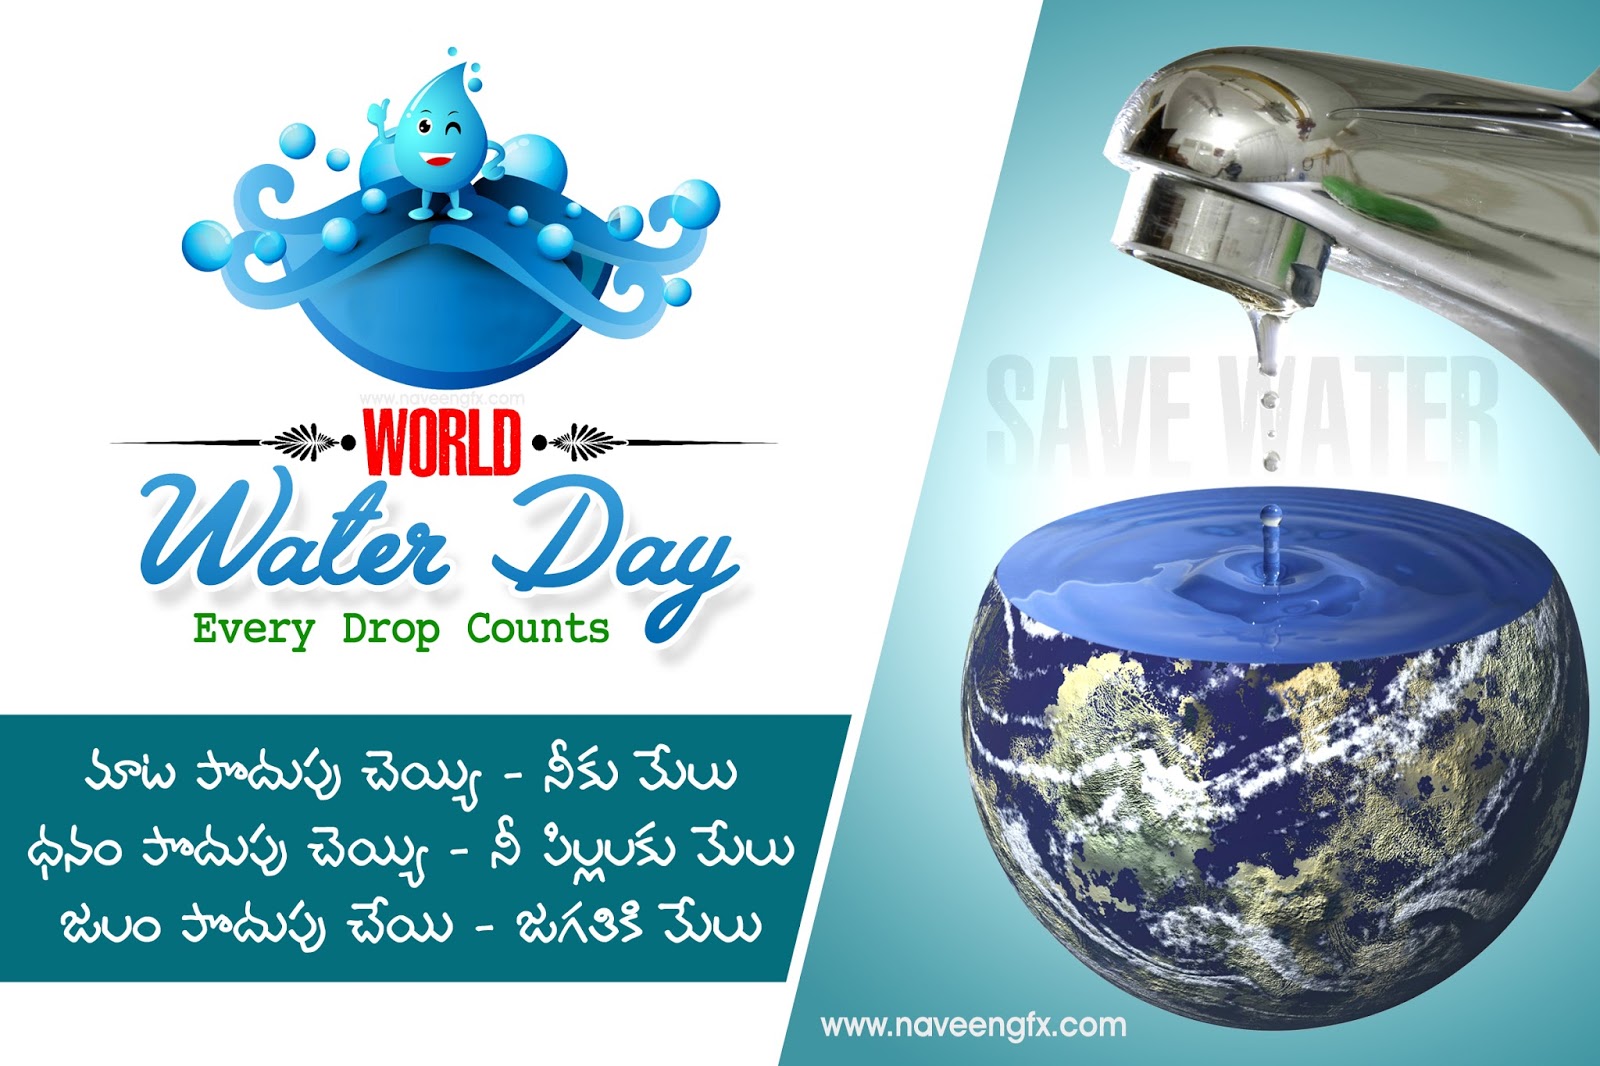 water saving images | The EcoBuzz